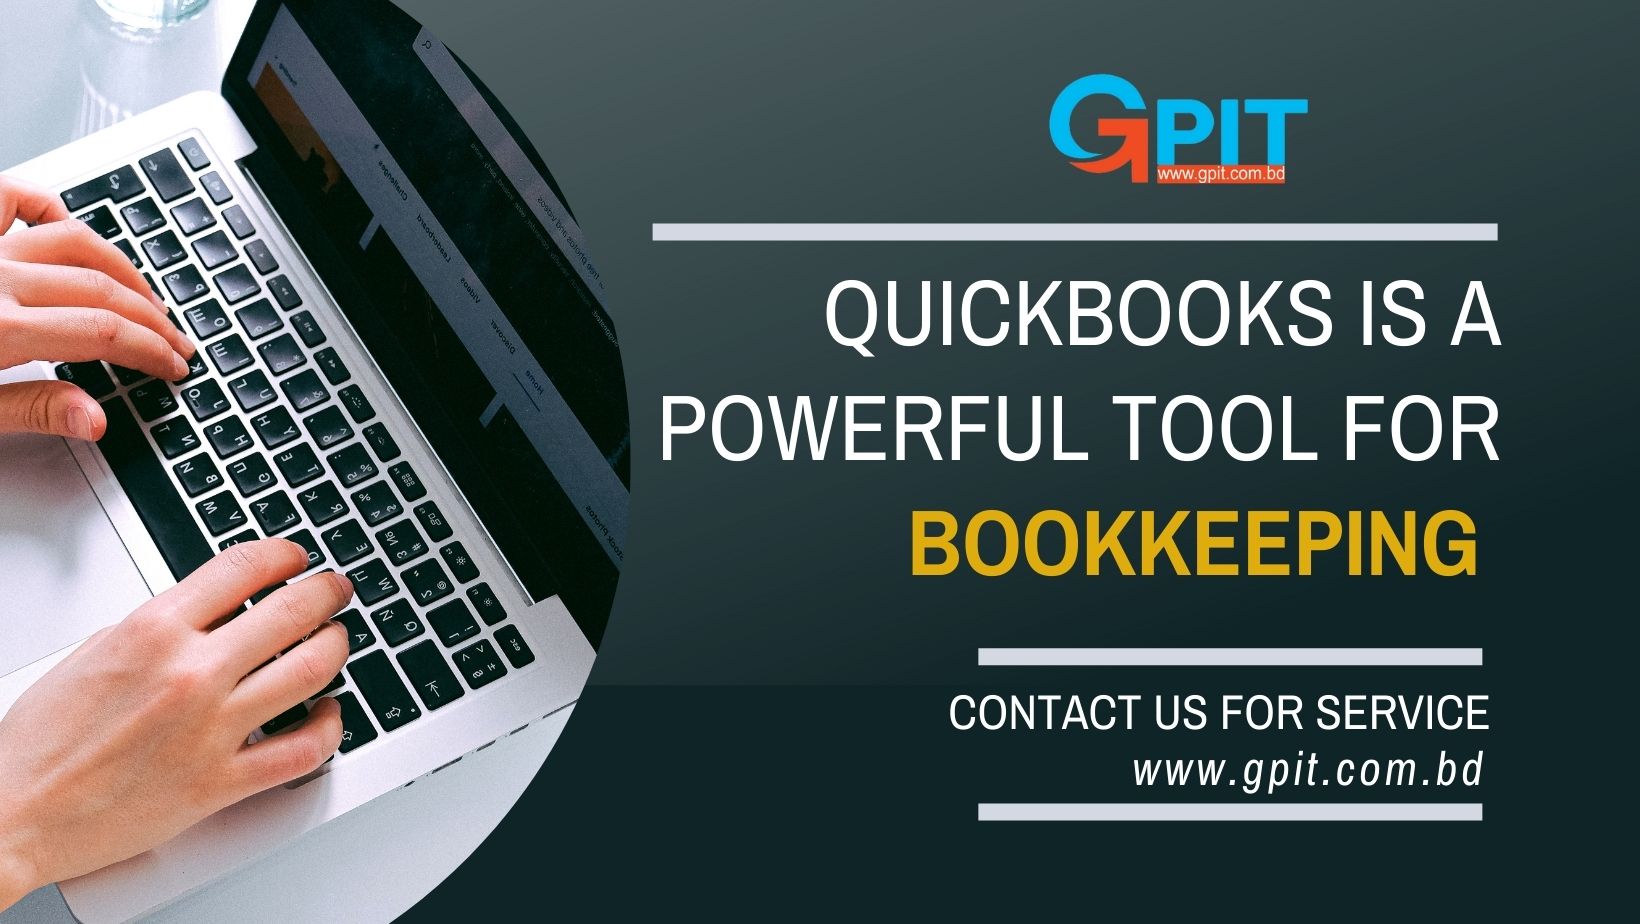 Bookipping powerful Software is QuickBooks